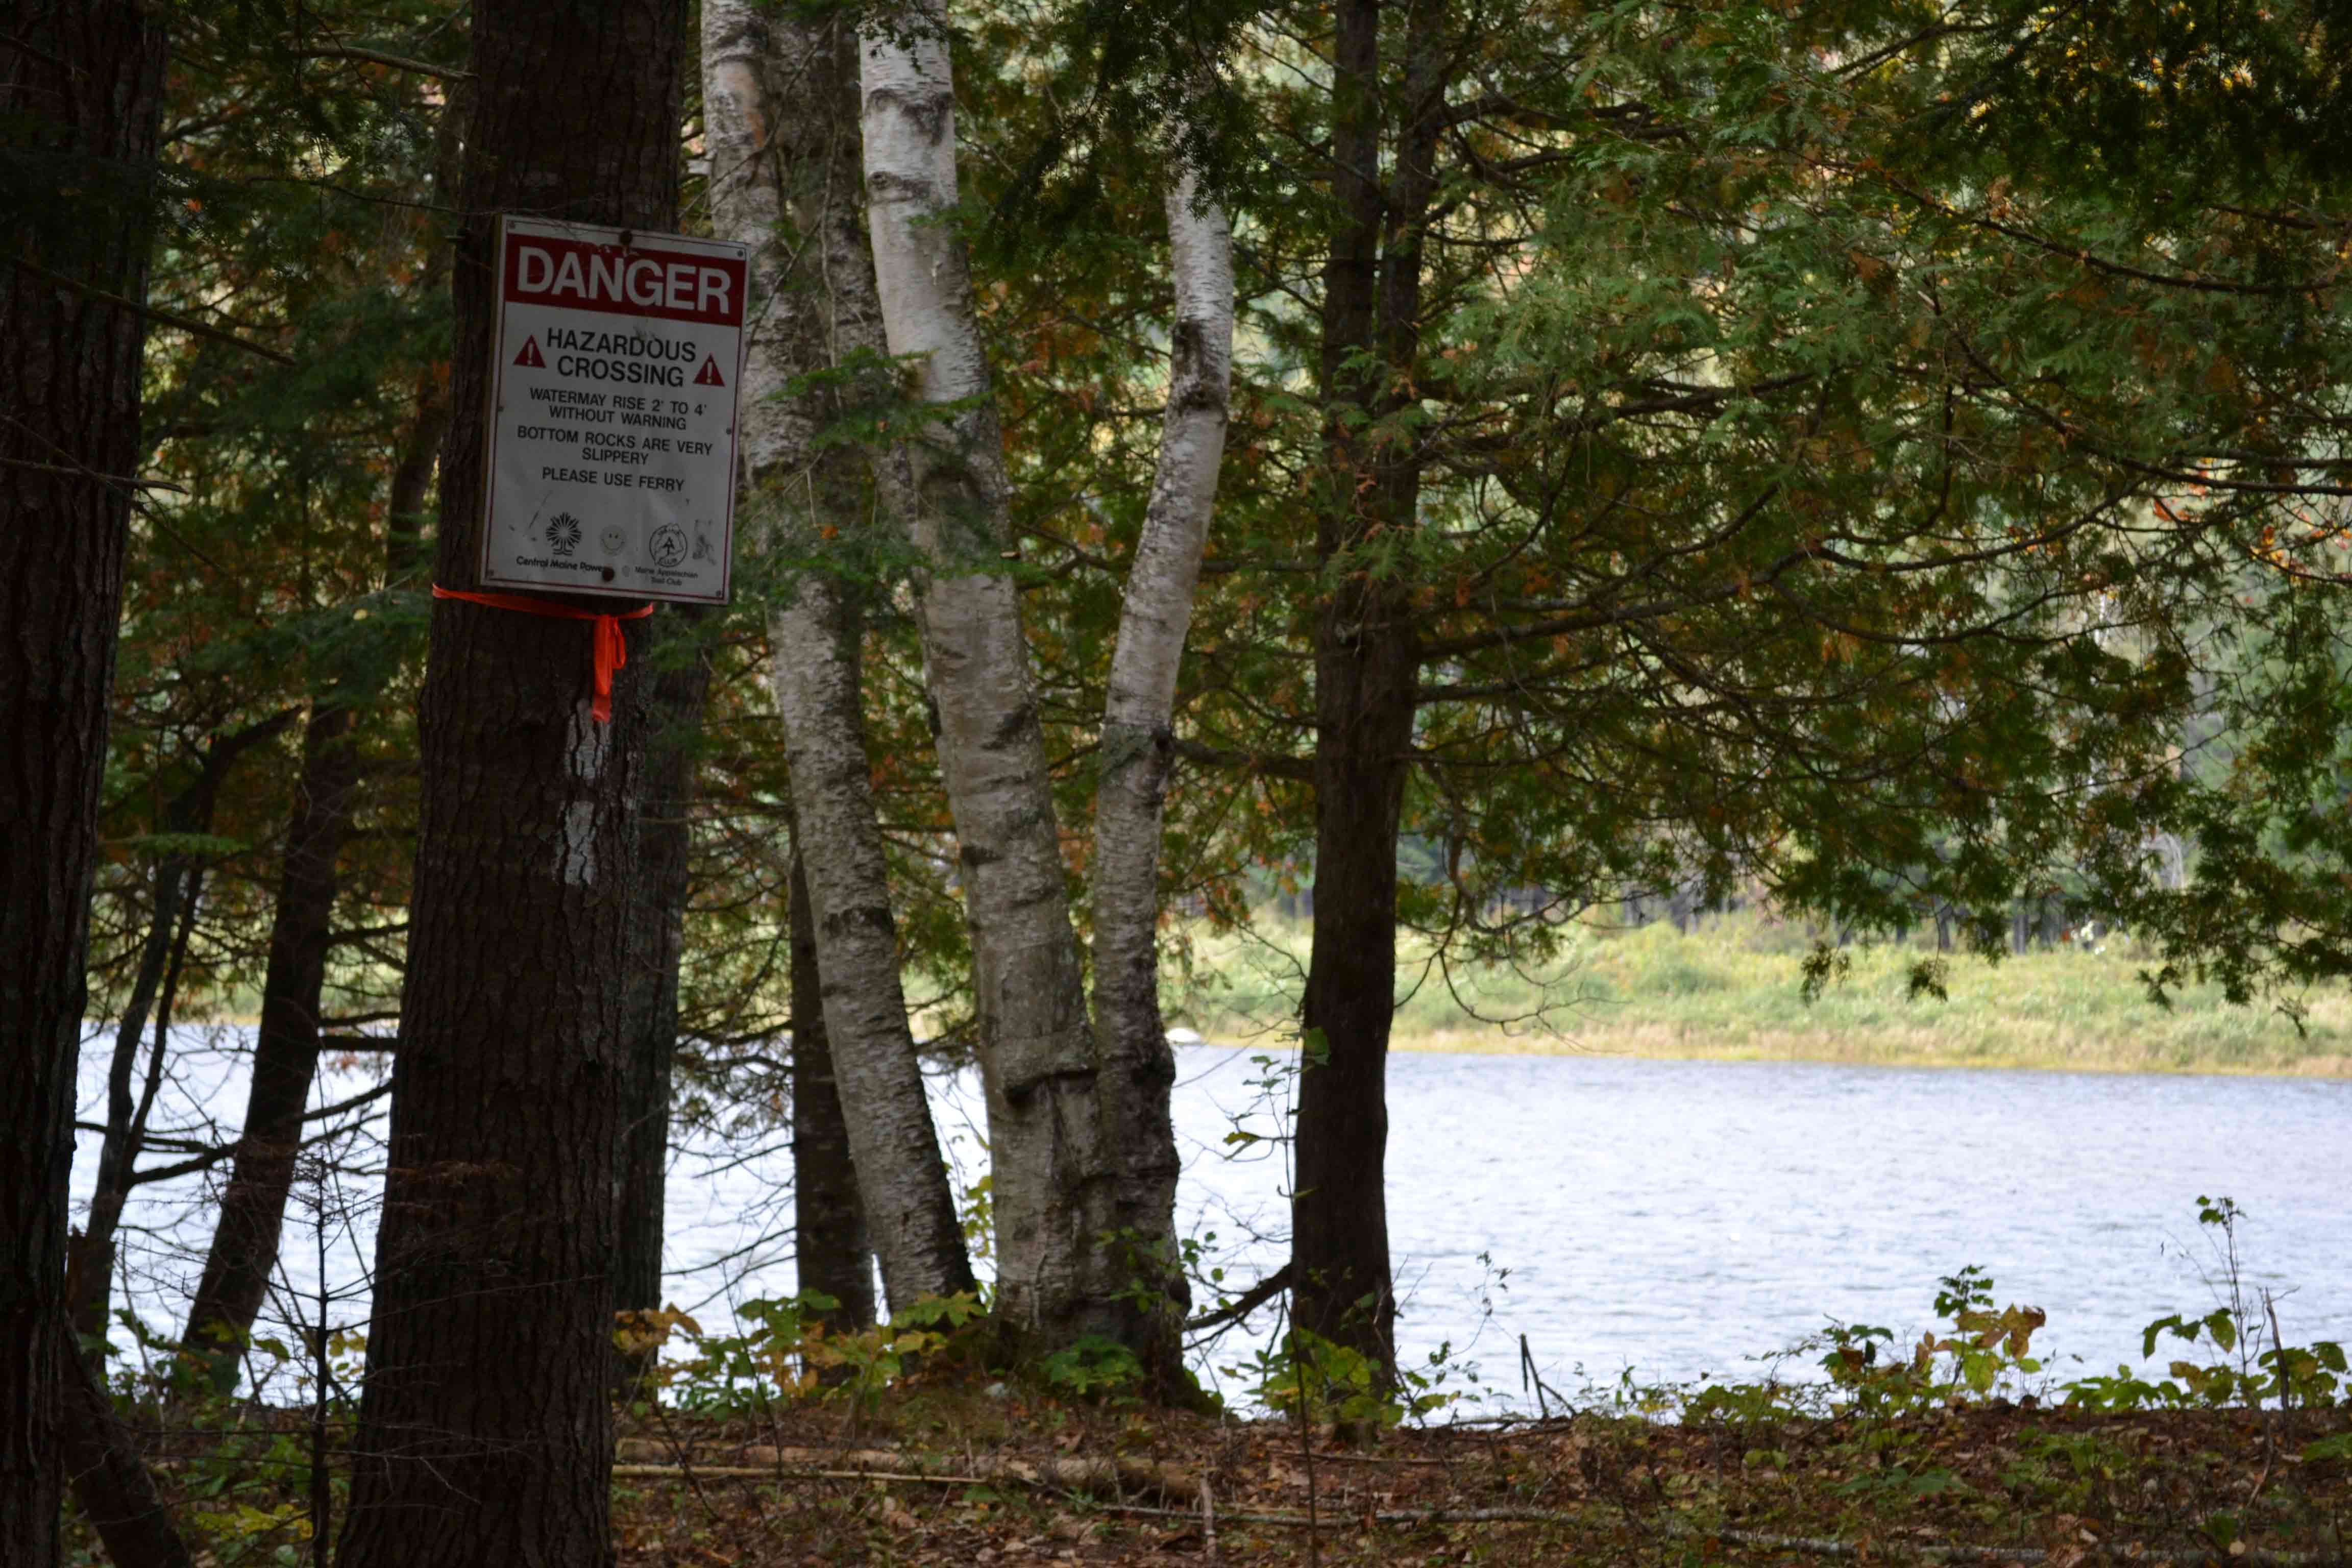 Kennebec River before ferry crossing - Warning not to cross river  Courtesy at@rohland.org